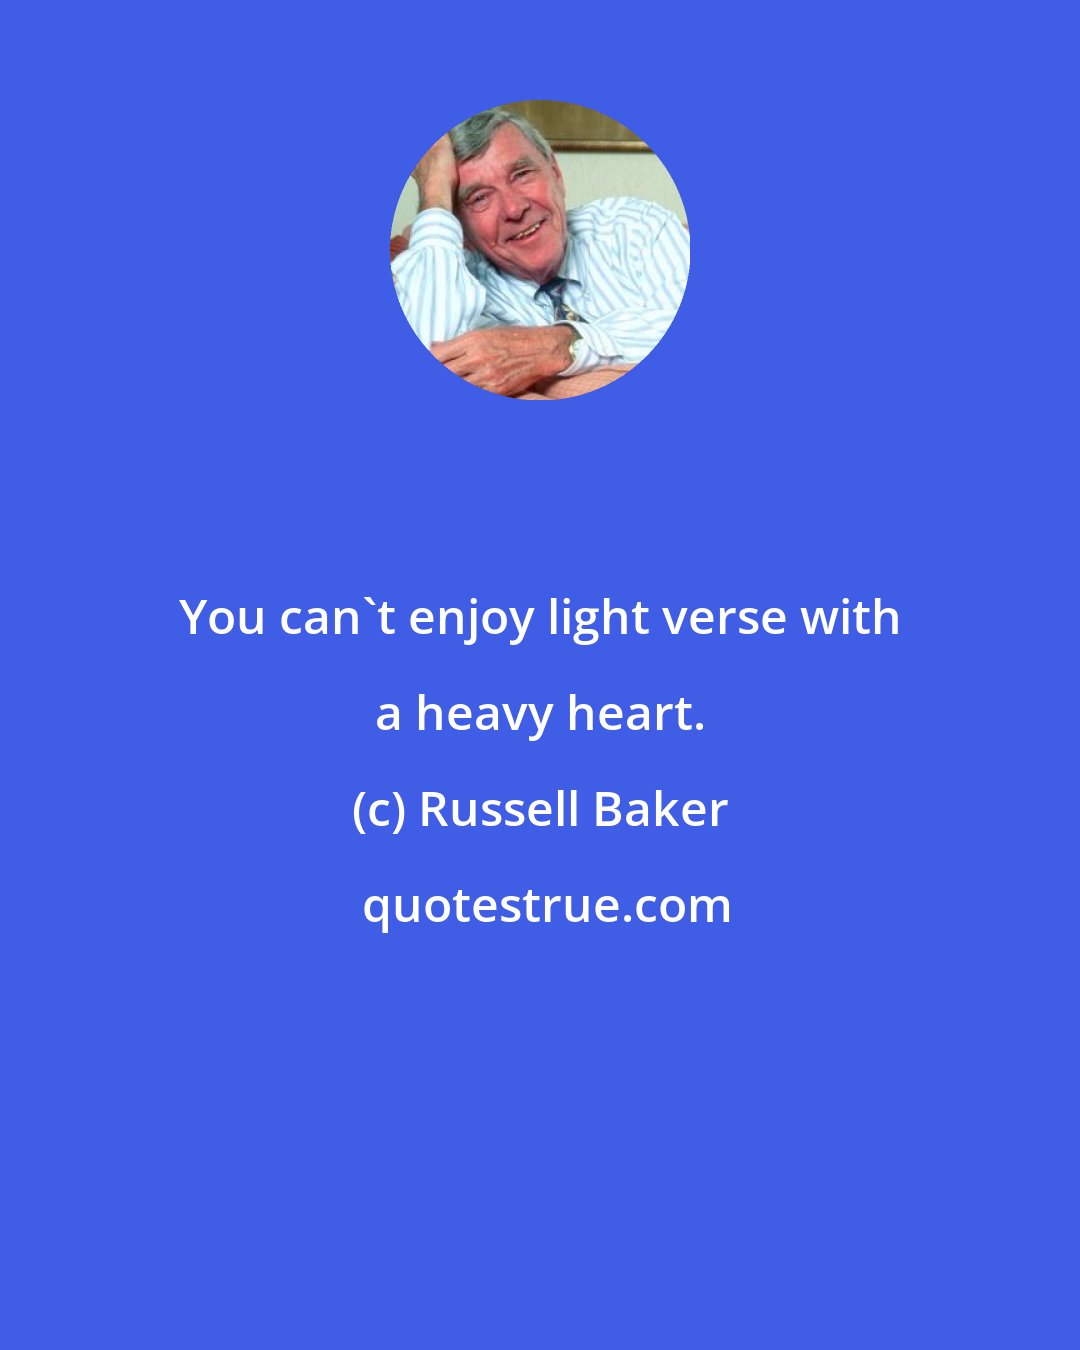 Russell Baker: You can't enjoy light verse with a heavy heart.